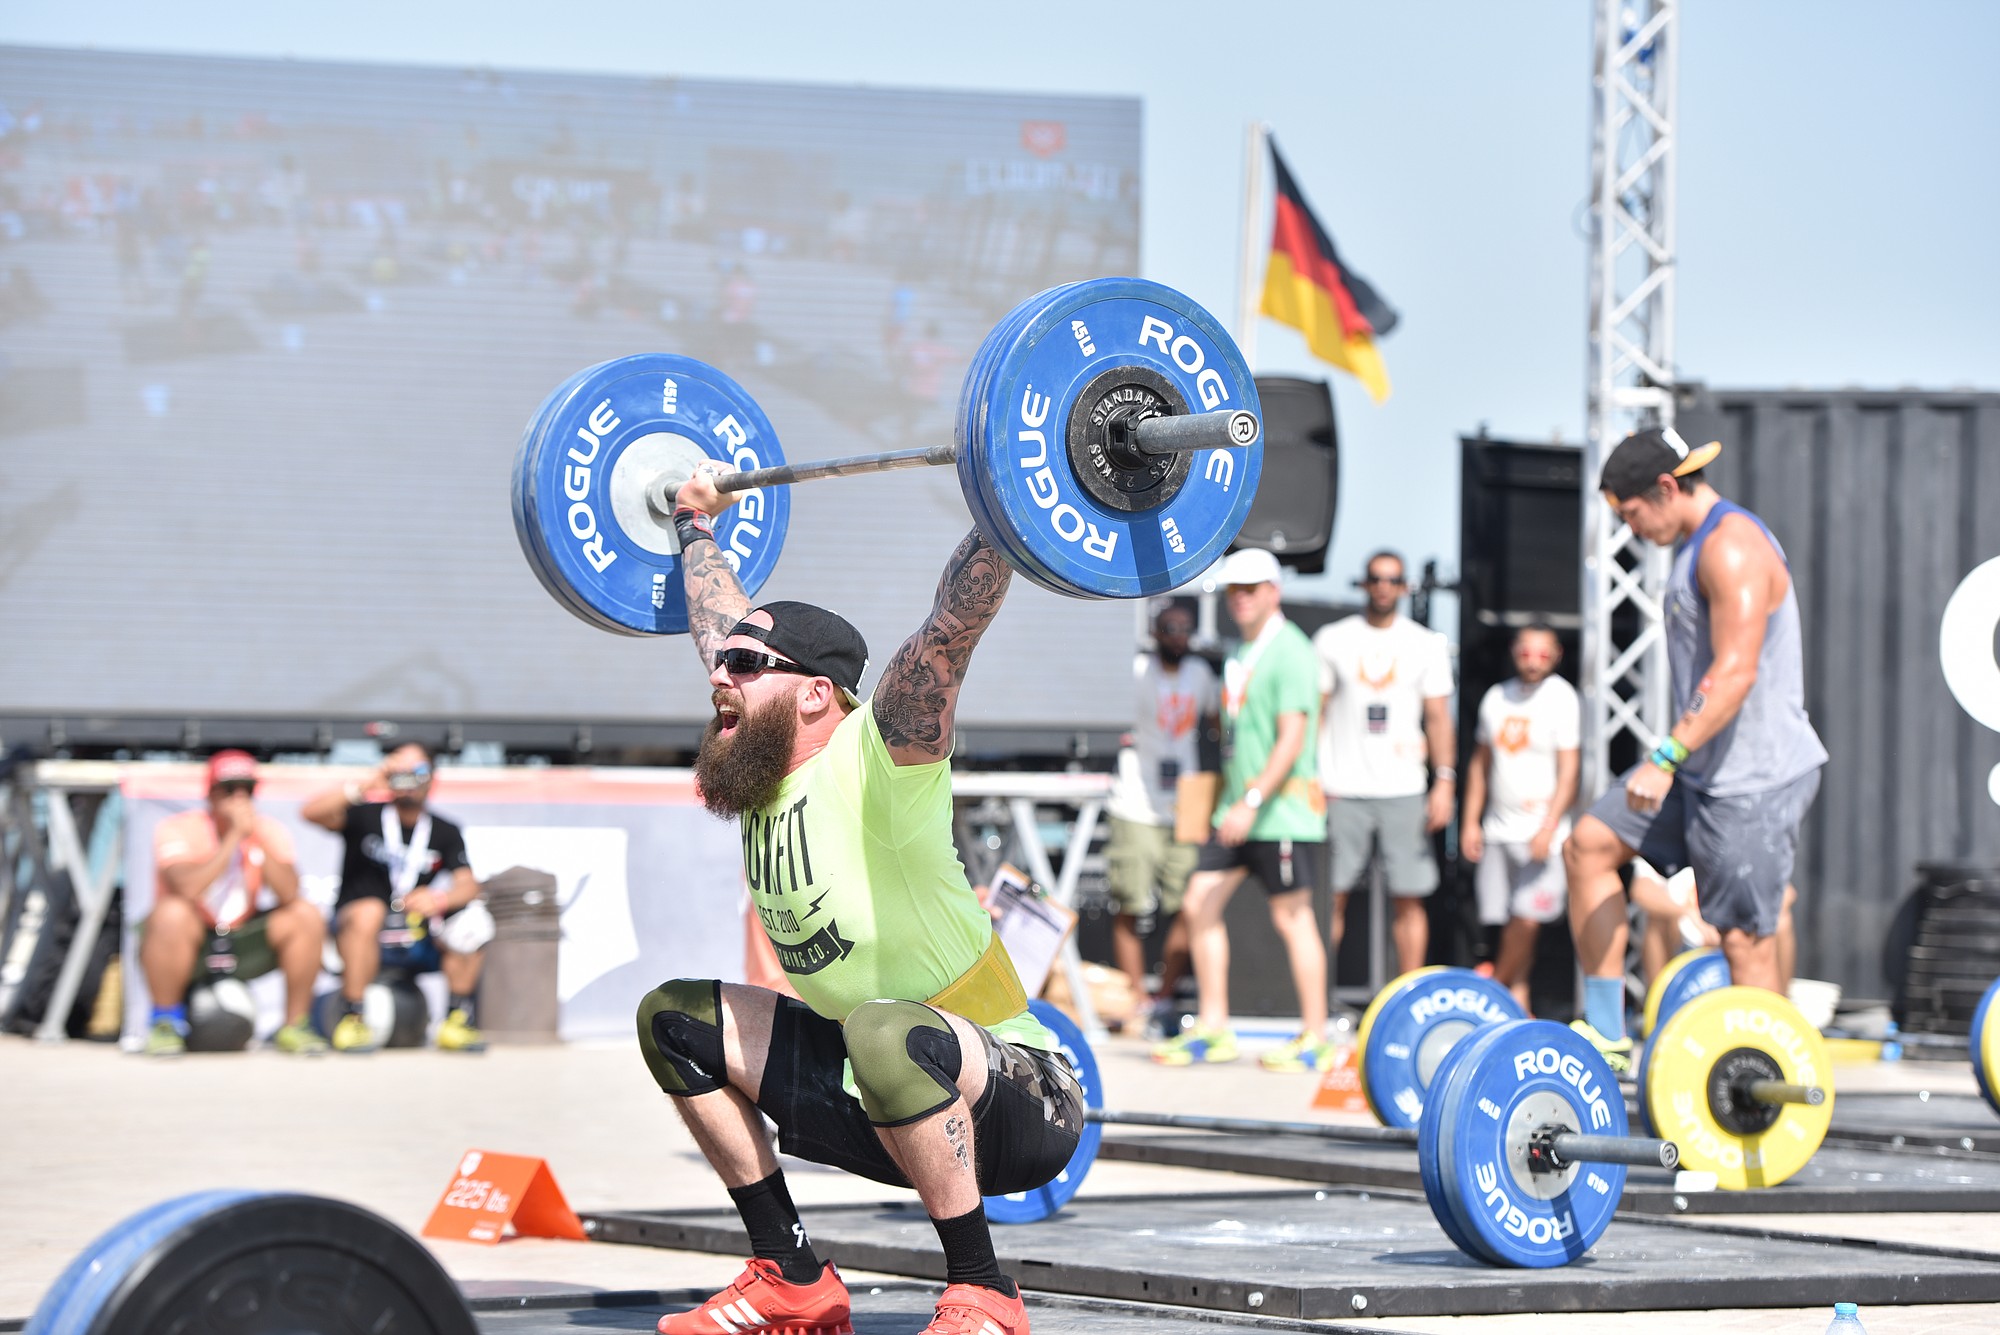 Former Evergreen running back Taylor Rank competes in the Battle of the East CrossFit event in Kuwait.